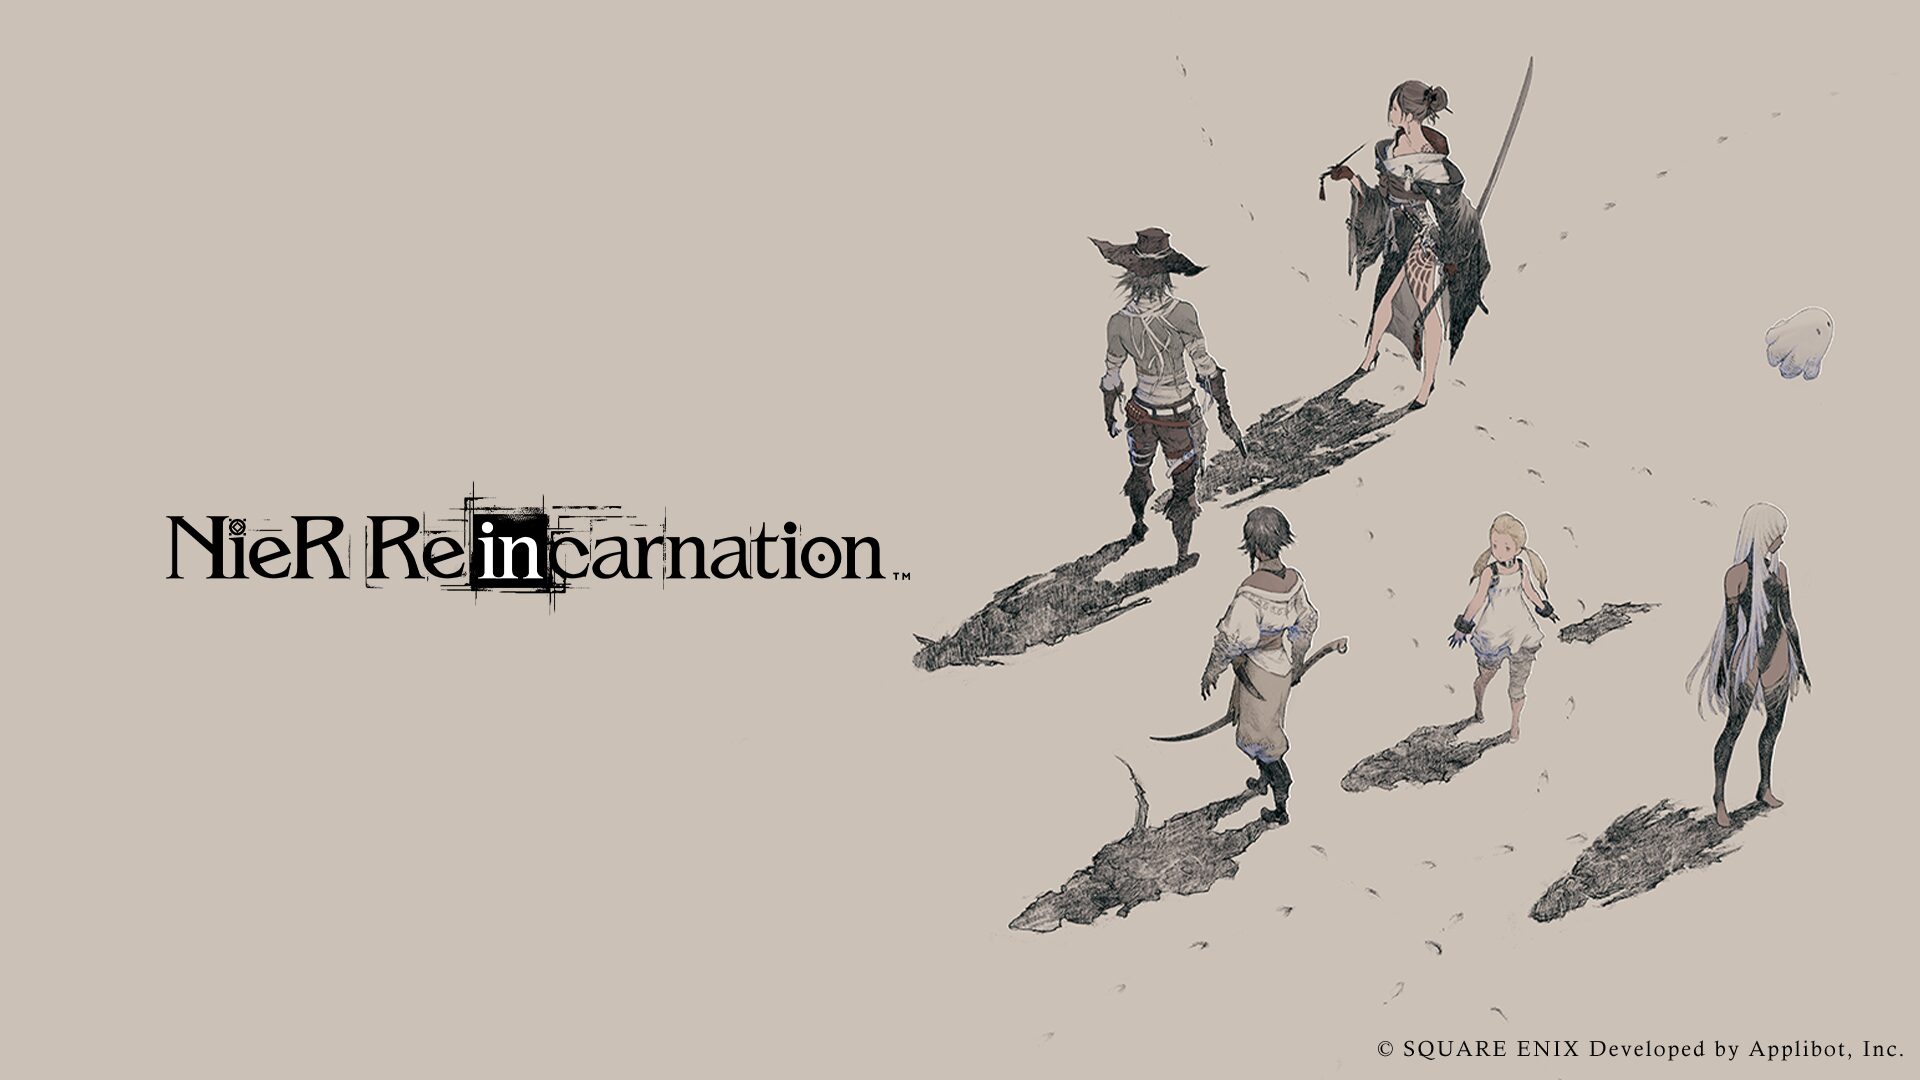 NieR Re(in)carnation ends its service on April 30